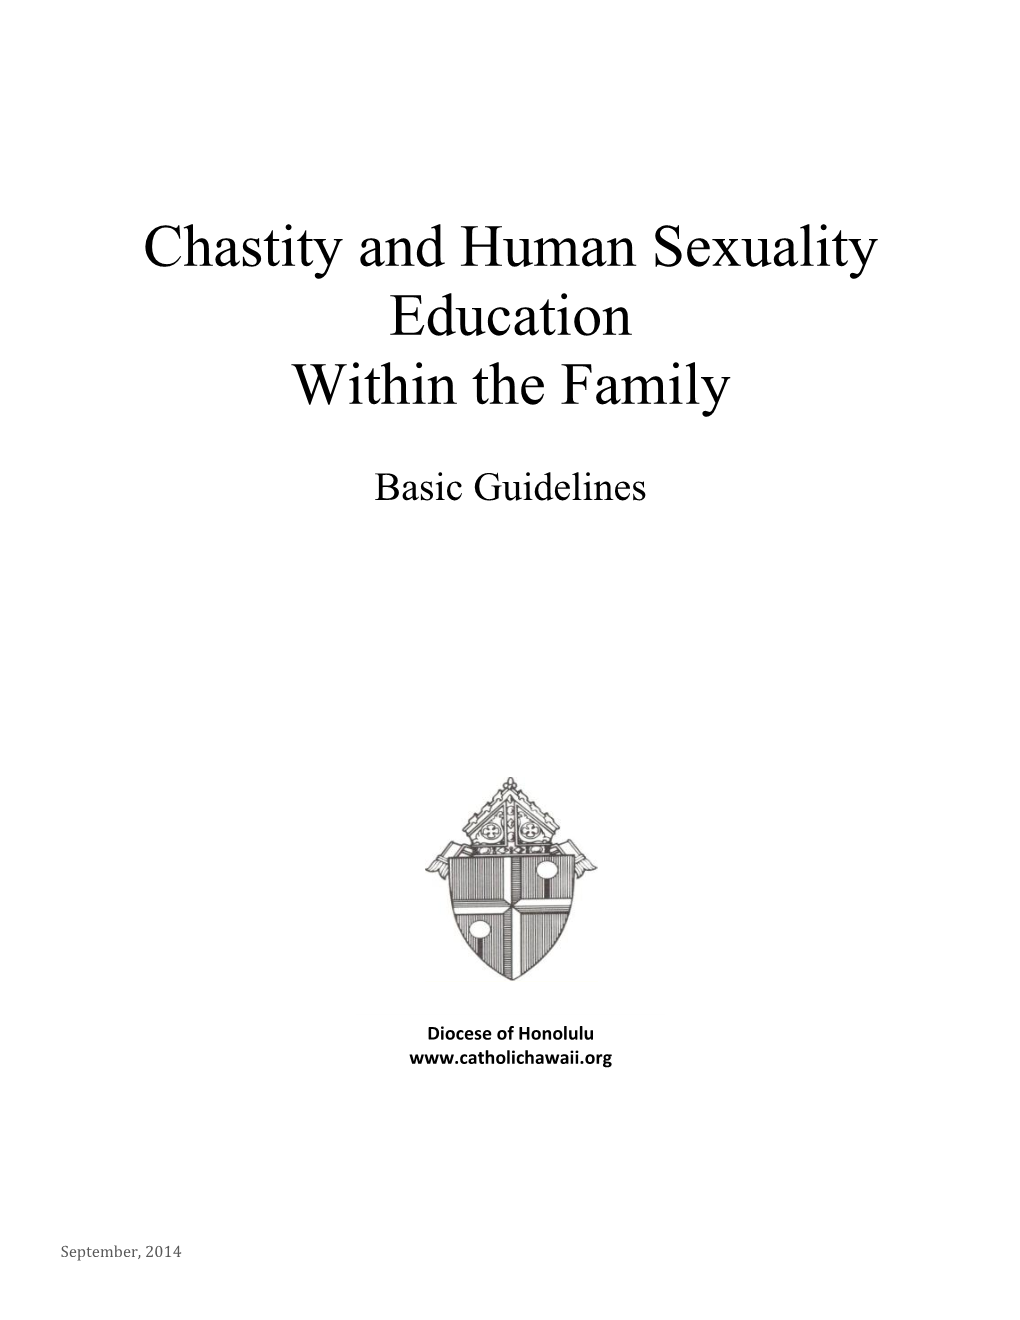 Chastity and Human Sexuality Education Within the Family